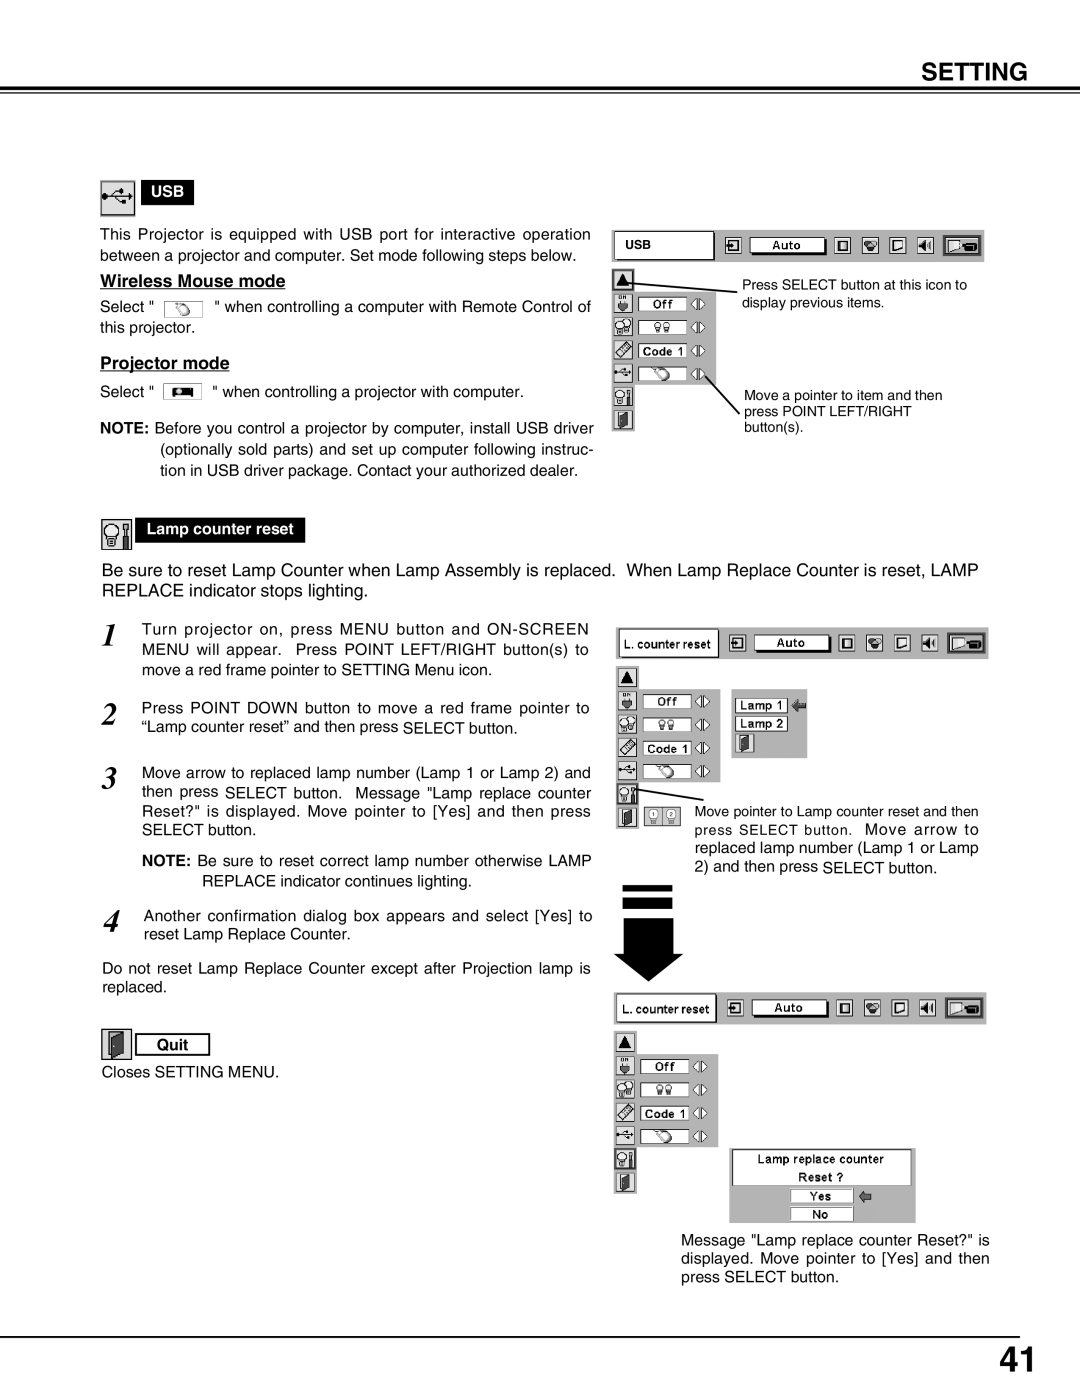 Christie Digital Systems 38-VIV302-01 user manual Setting, Wireless Mouse mode, Projector mode, Lamp counter reset, Quit 